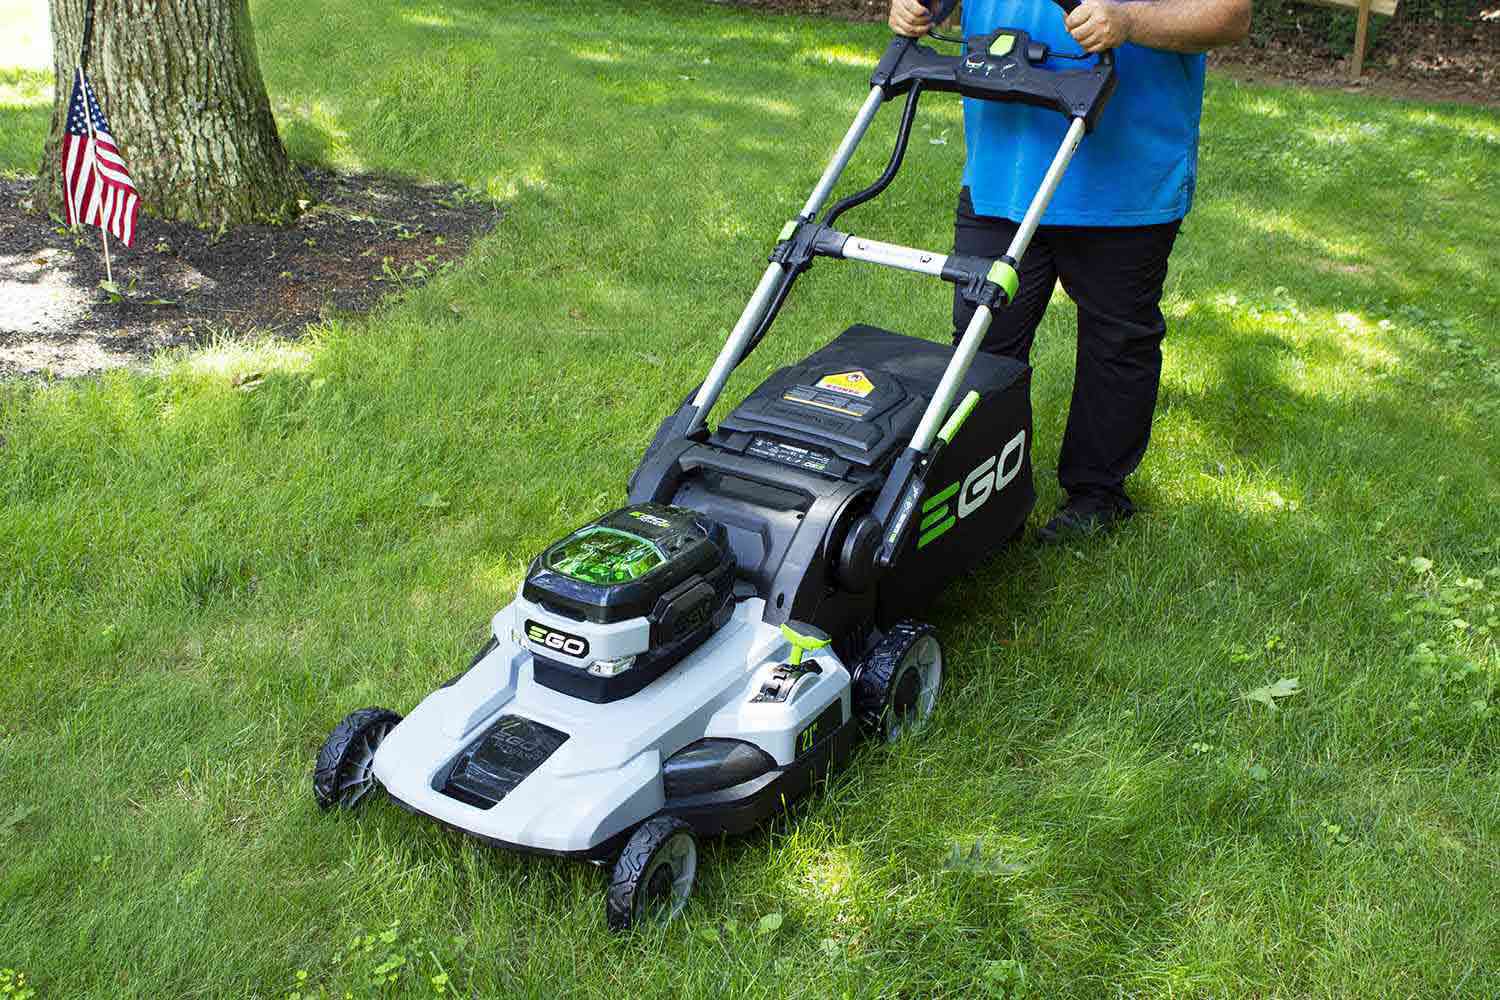 Top Rated Battery Powered Lawn Mowers